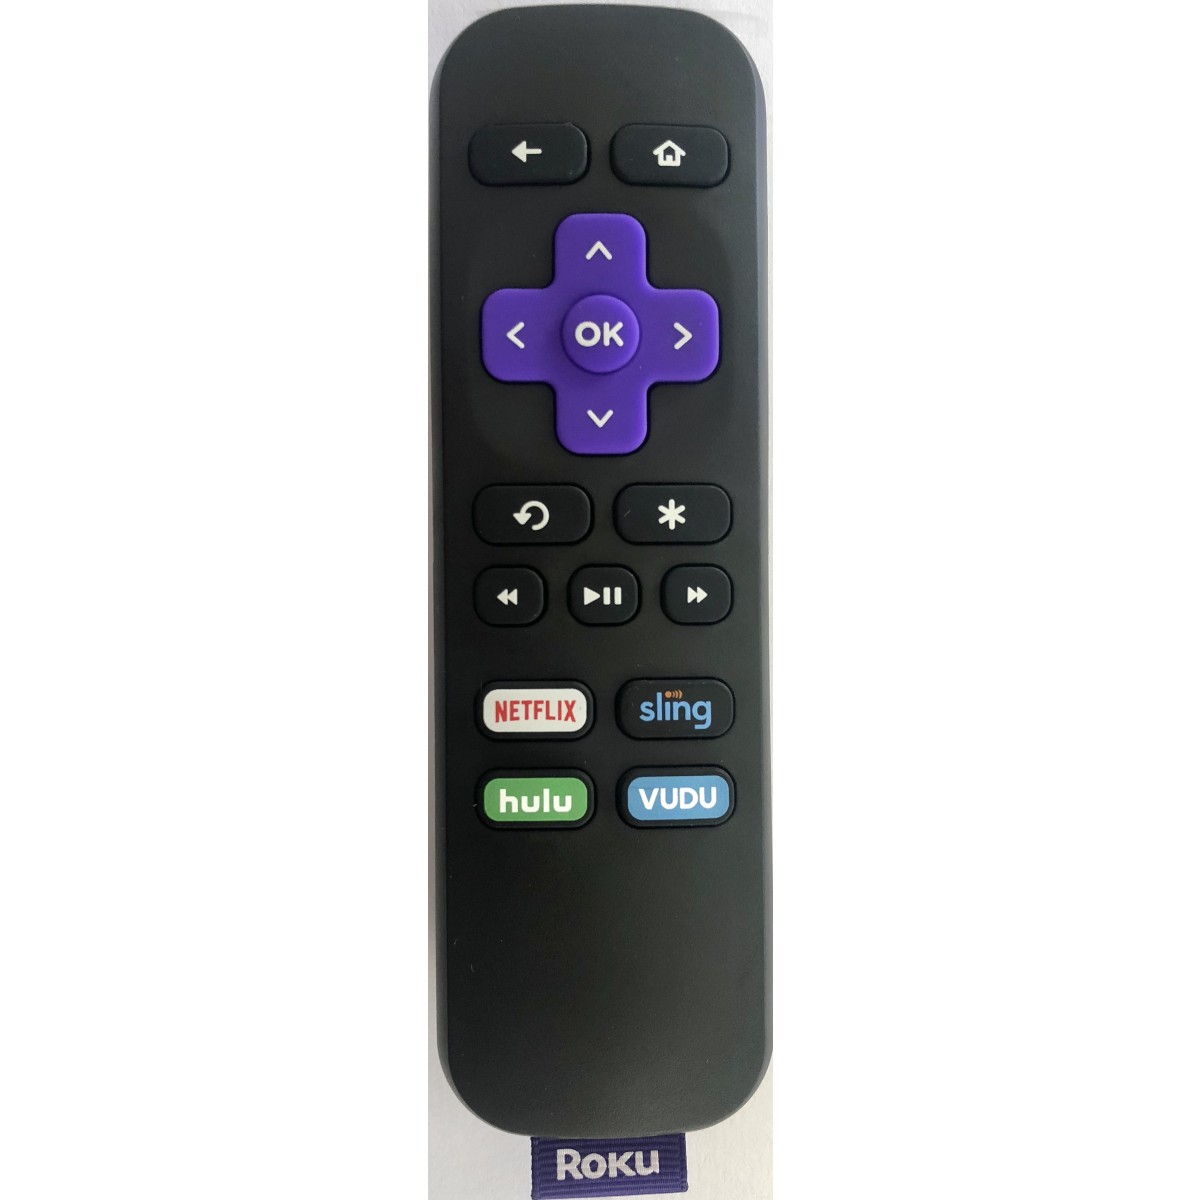 Genuine Roku RC108 Remote With Dedicated Buttons Netflix Sling Hulu Vudu Compatible with: Roku LT Roku HD, XD, XDS Roku N1 Roku 1 Roku 2 Roku 2 HD, XD, XS Roku 3 Roku Express Roku Express+ - image 2 of 3